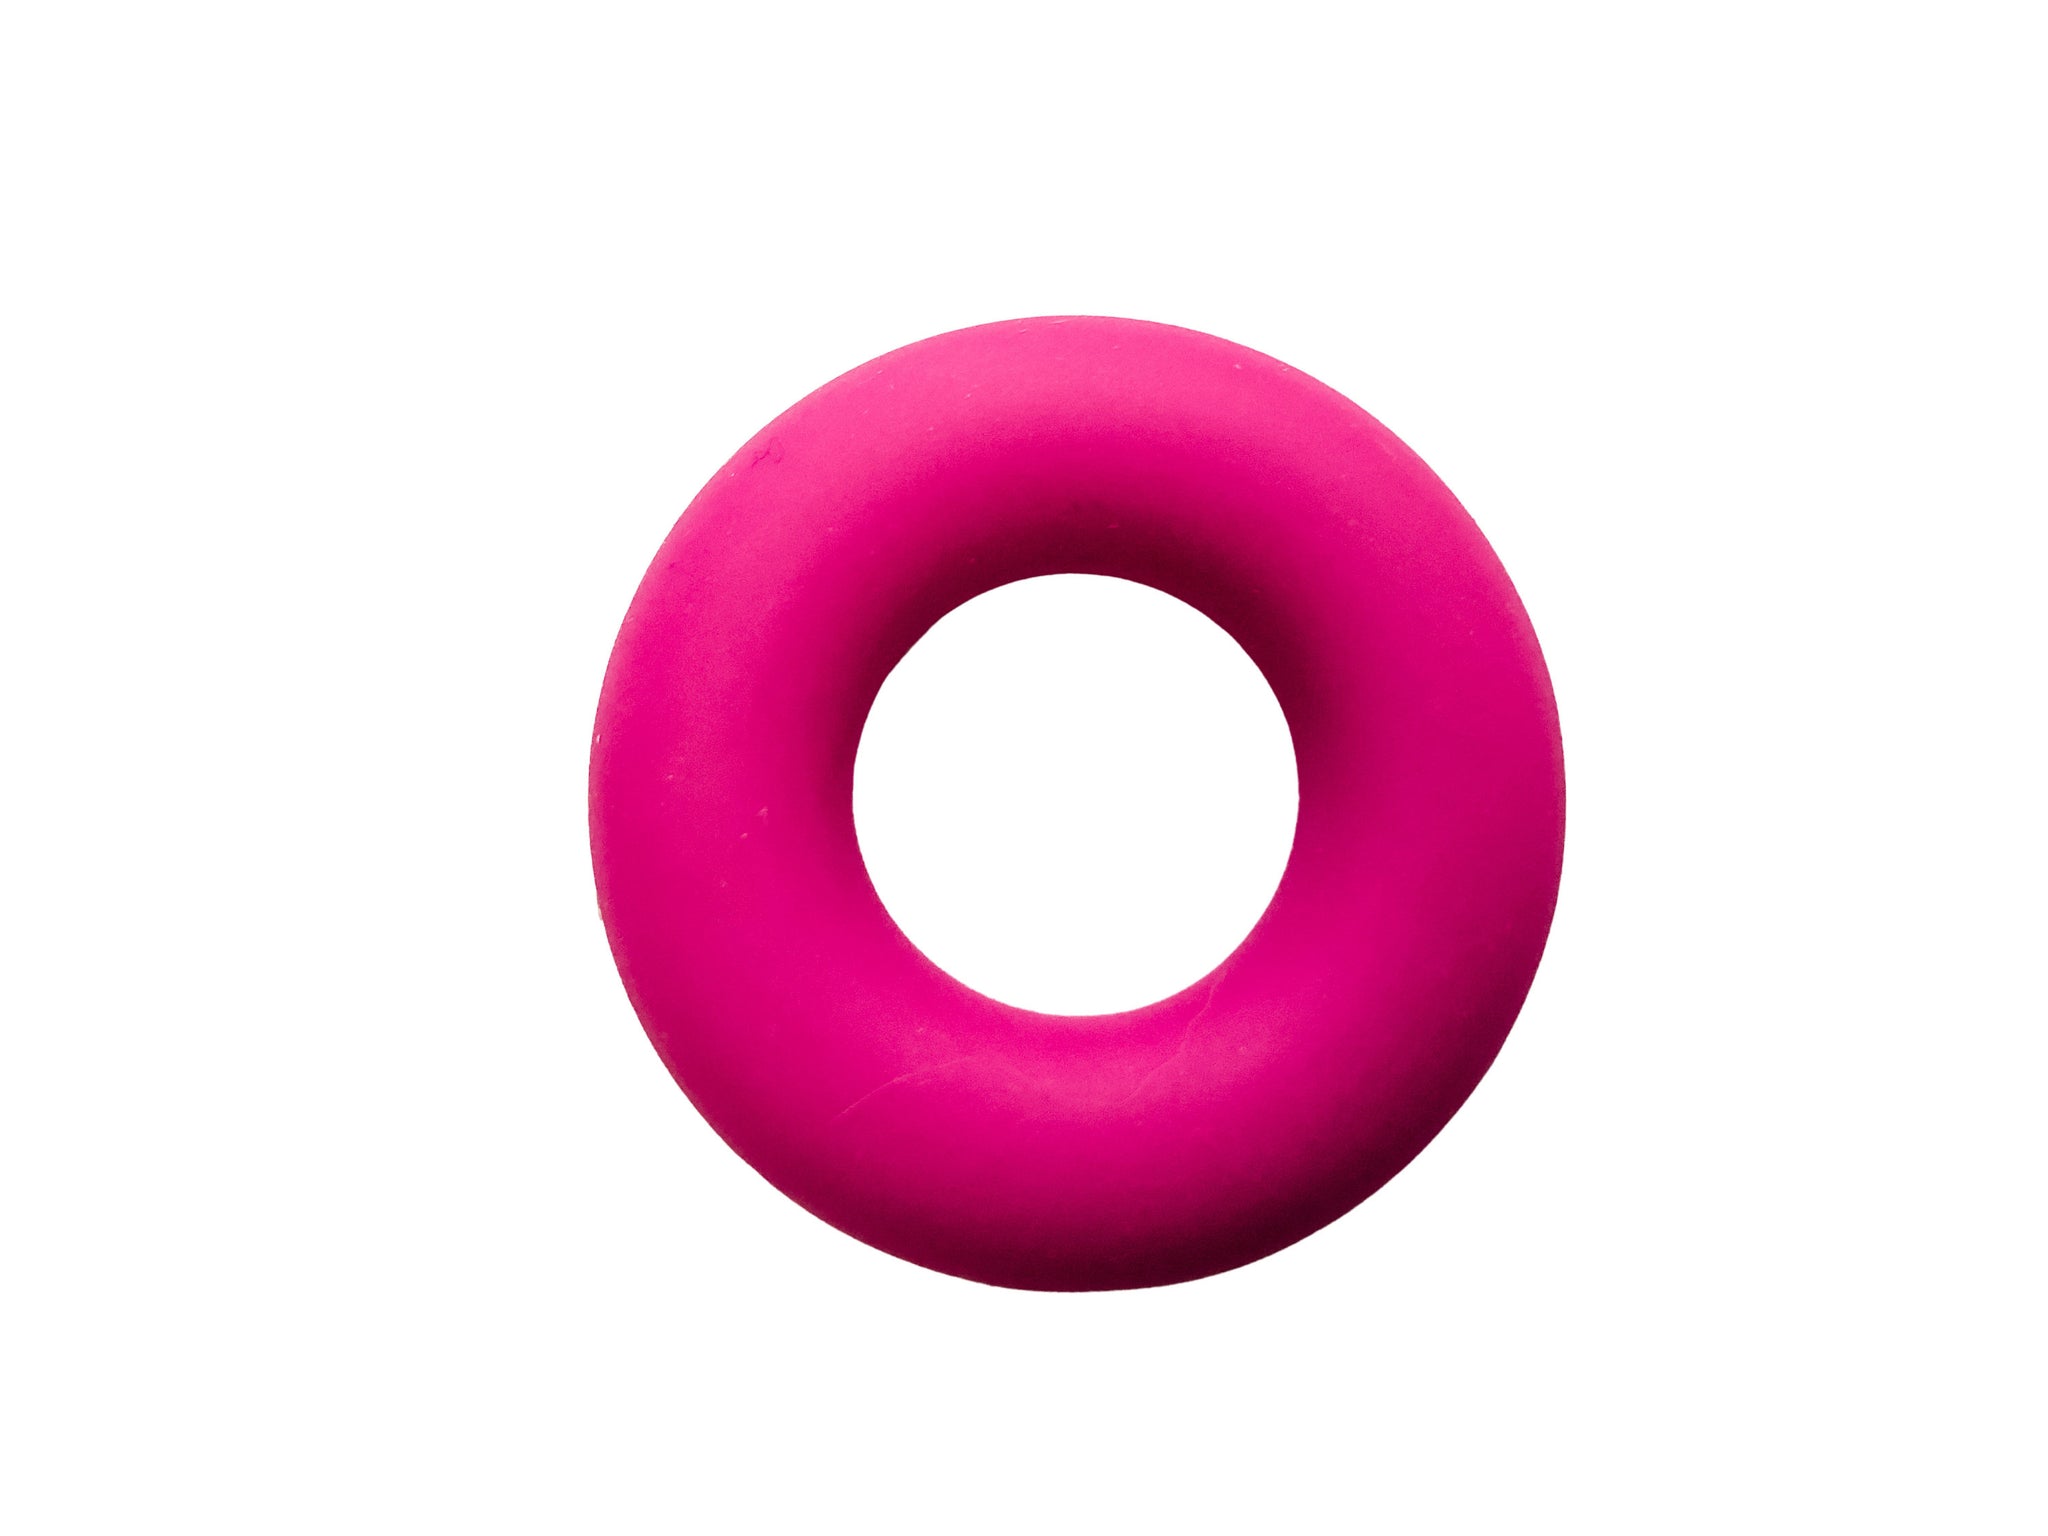 Magenta Silicone Ring Beads Pendant - Seamless Silicone Donut Beads